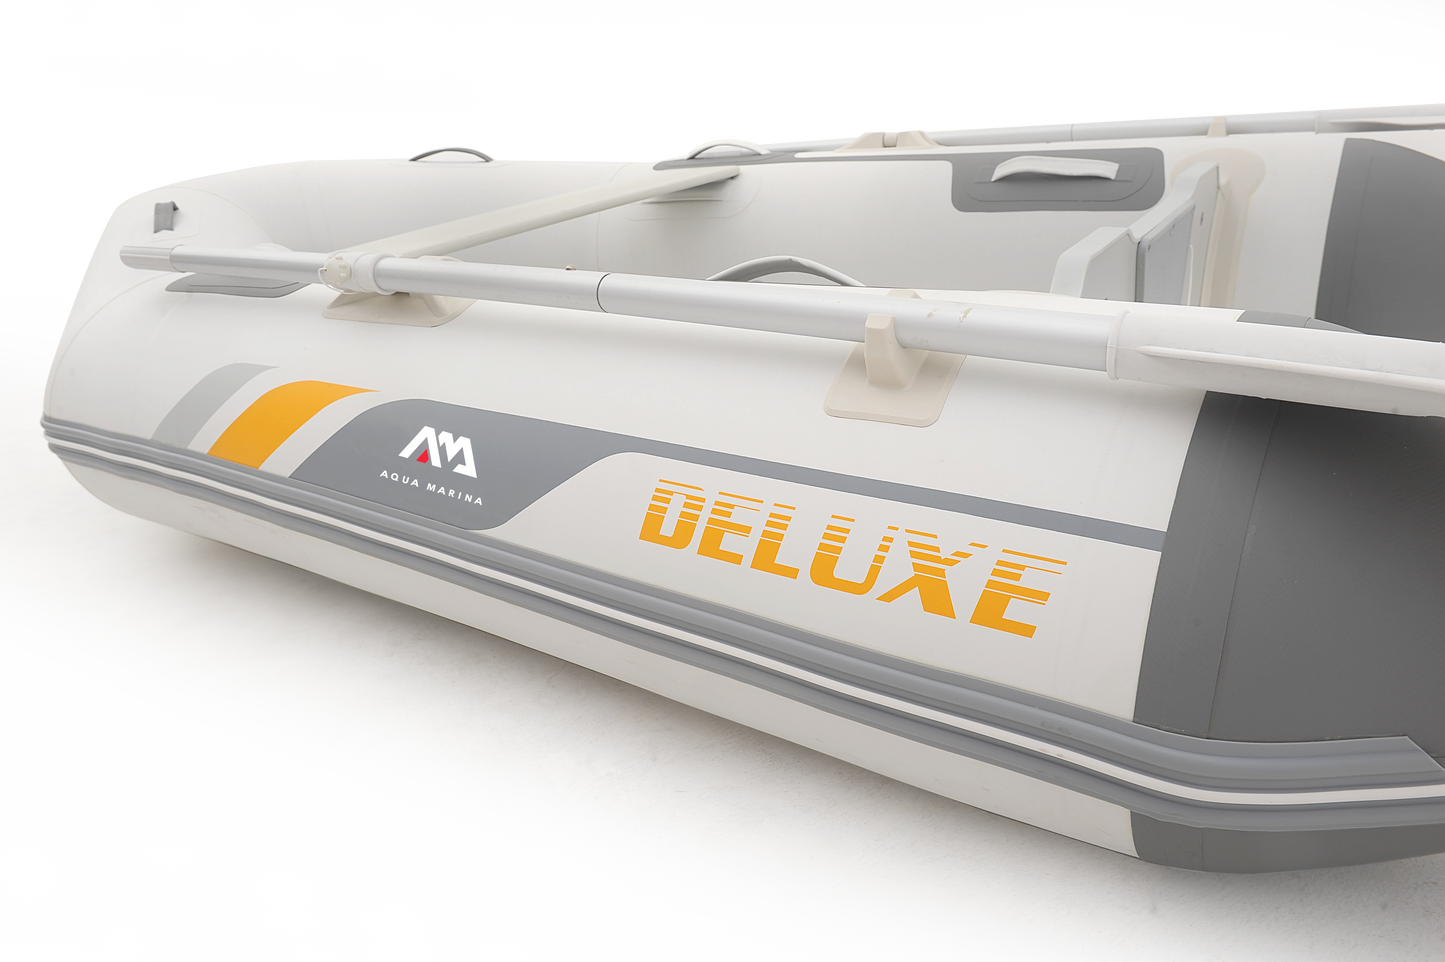 DELUXE Sports boat. 2.77m  with Aluminum Deck